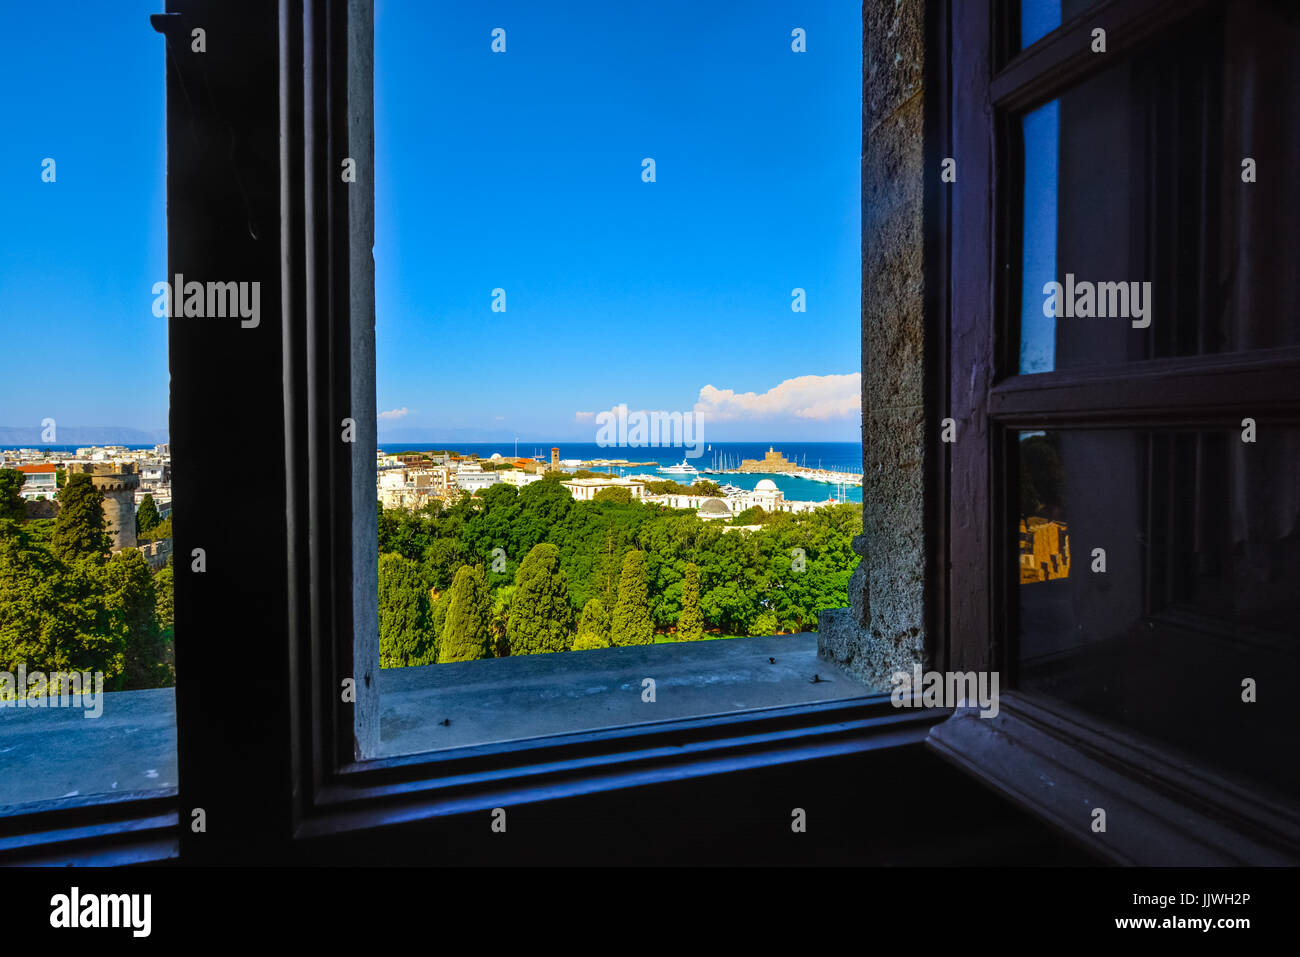 Looking at the old town and shoreline out the window of the Rhodes Castle on the island of Rhodes, Greece in the Mediterranean sea. Stock Photo